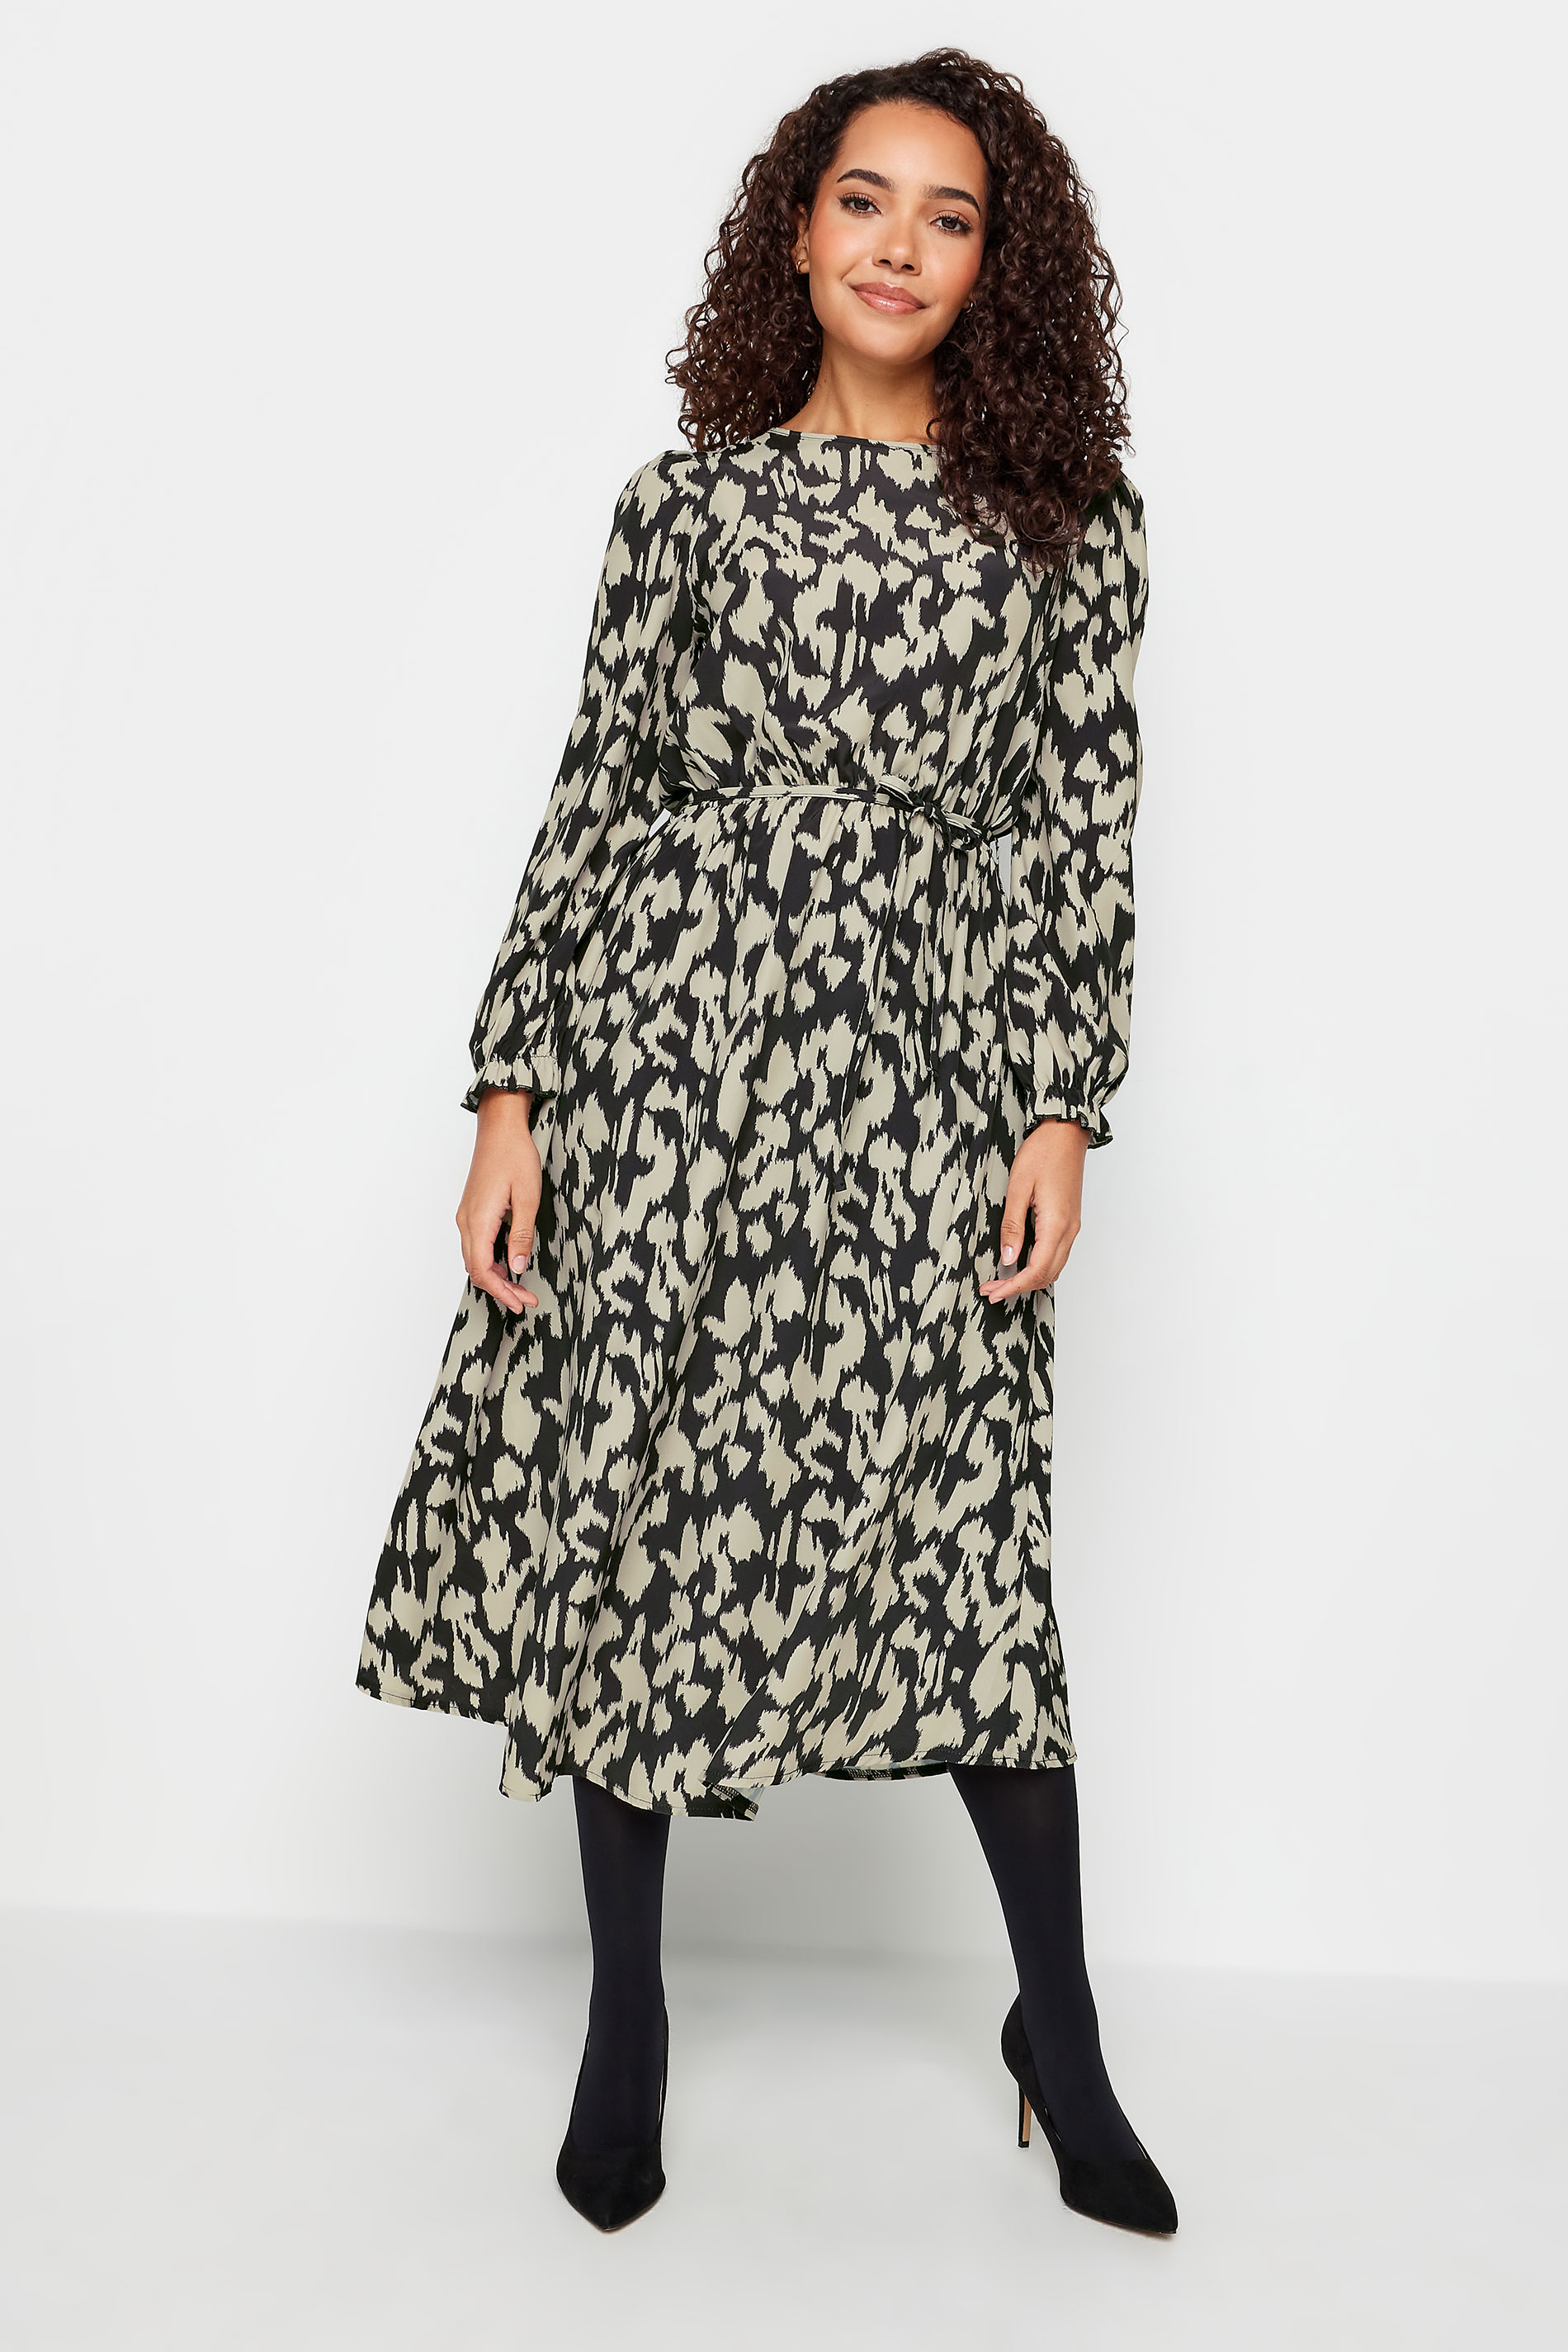 M&Co Green Abstract Print Smock Dress | M&Co 1